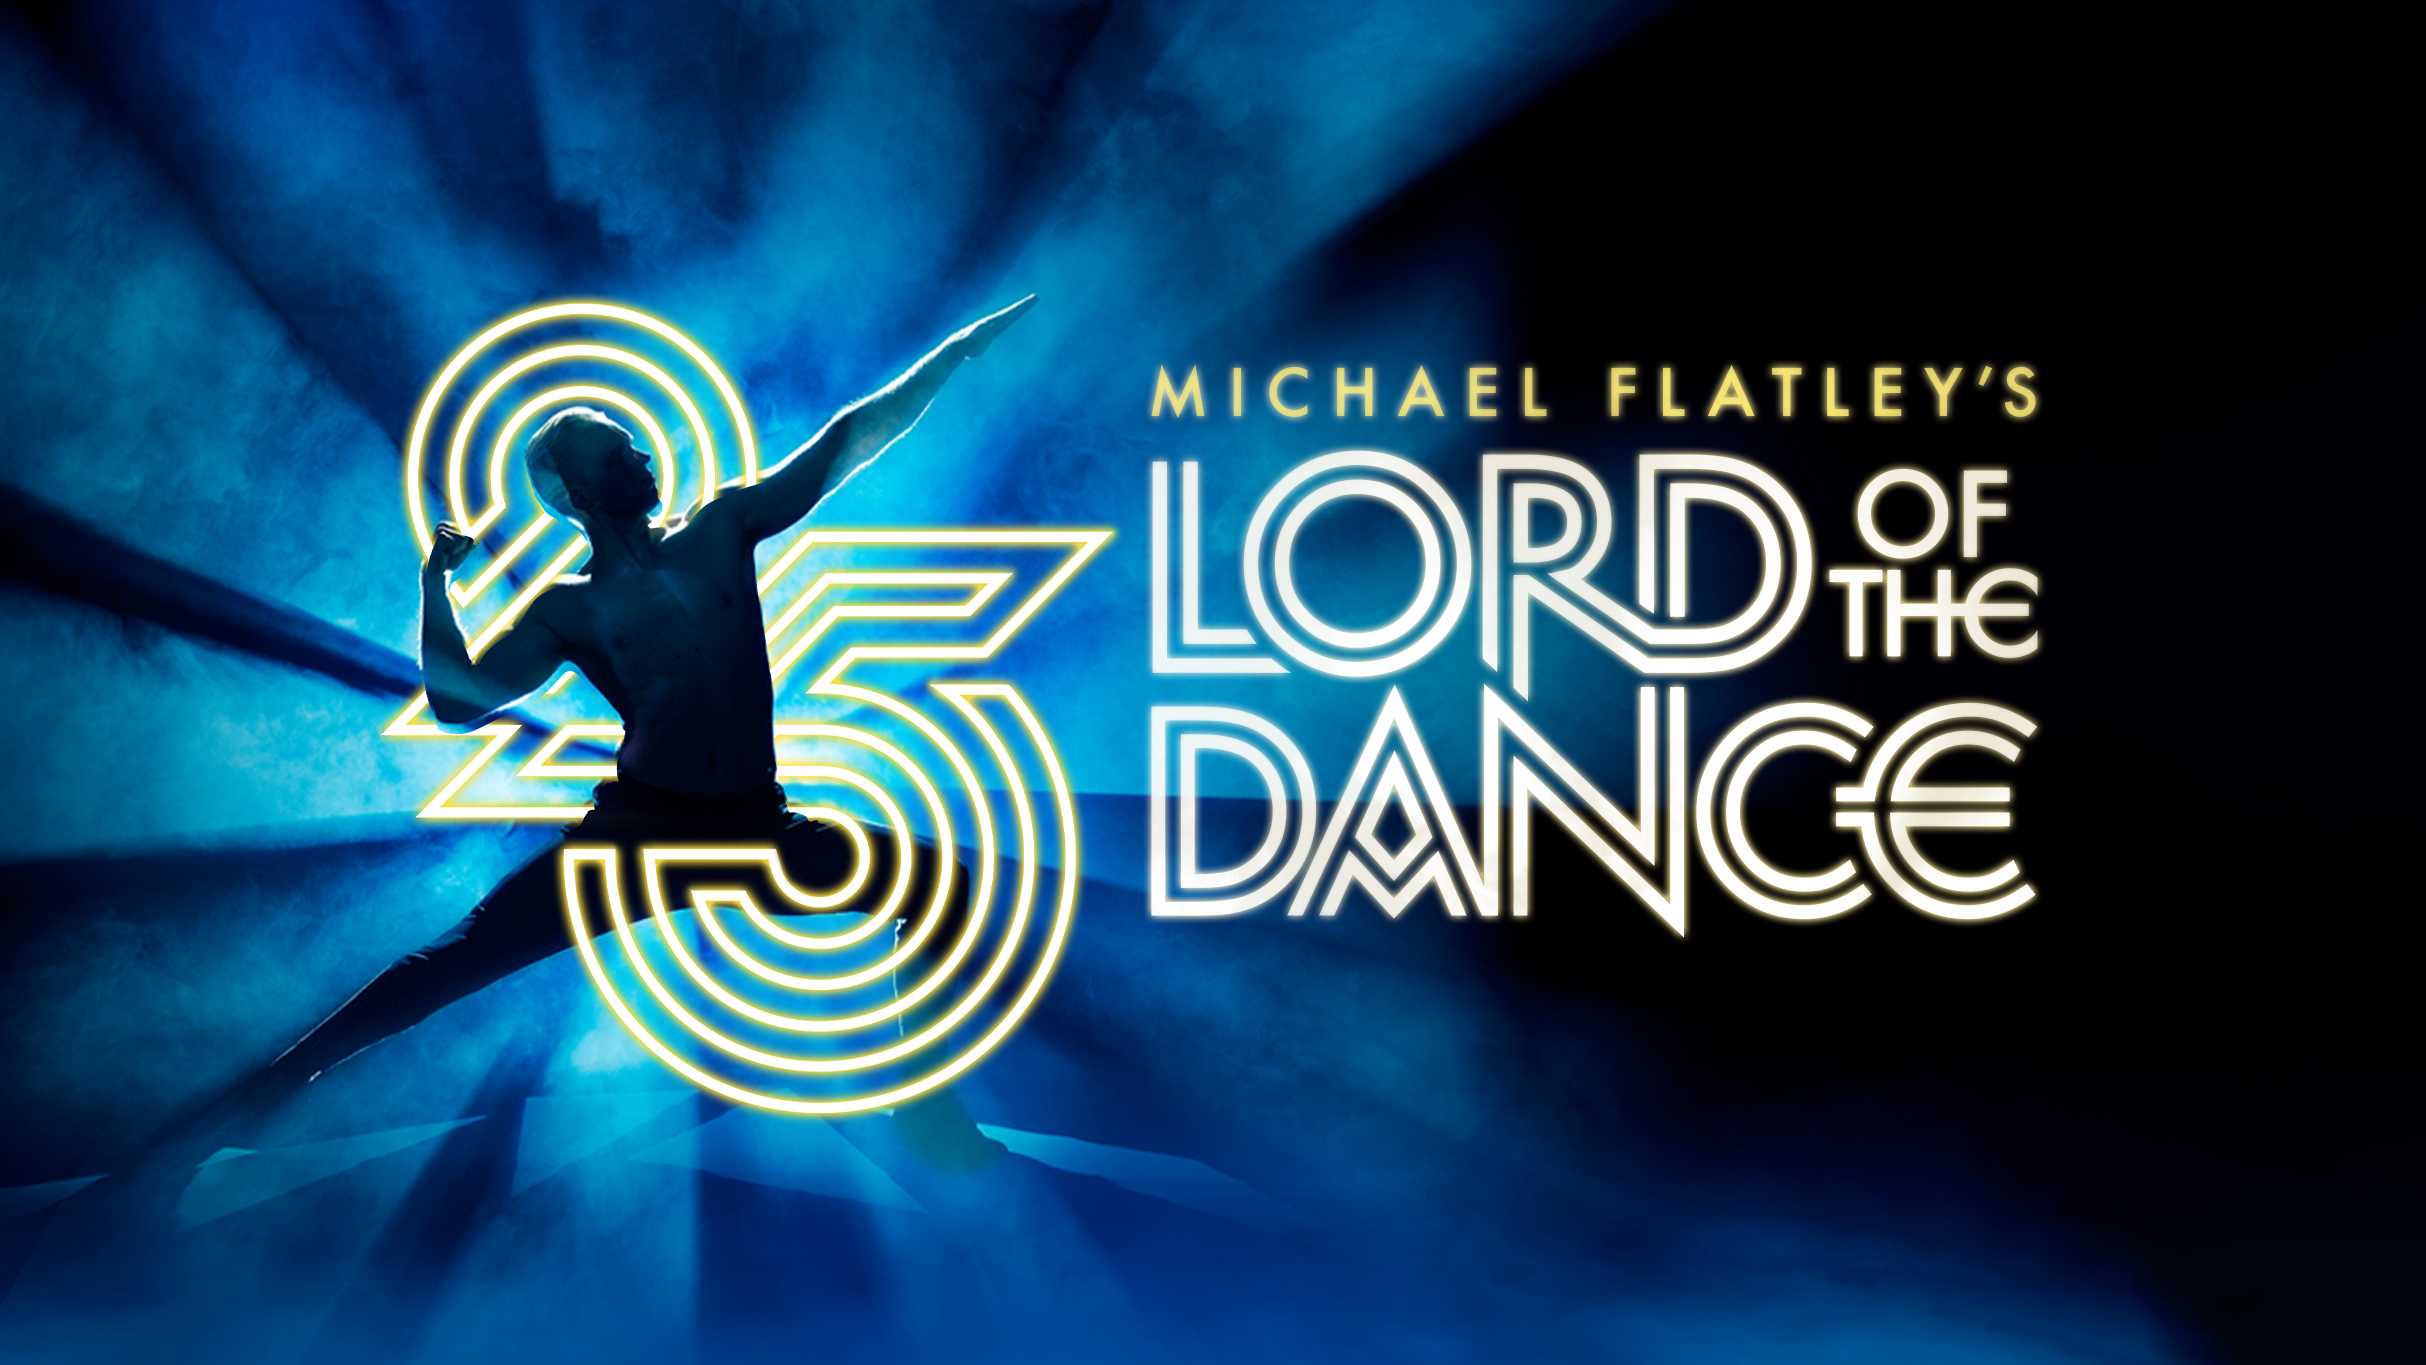 Michael Flatley's Lord of the Dance- 25 Years of Standing Ovations